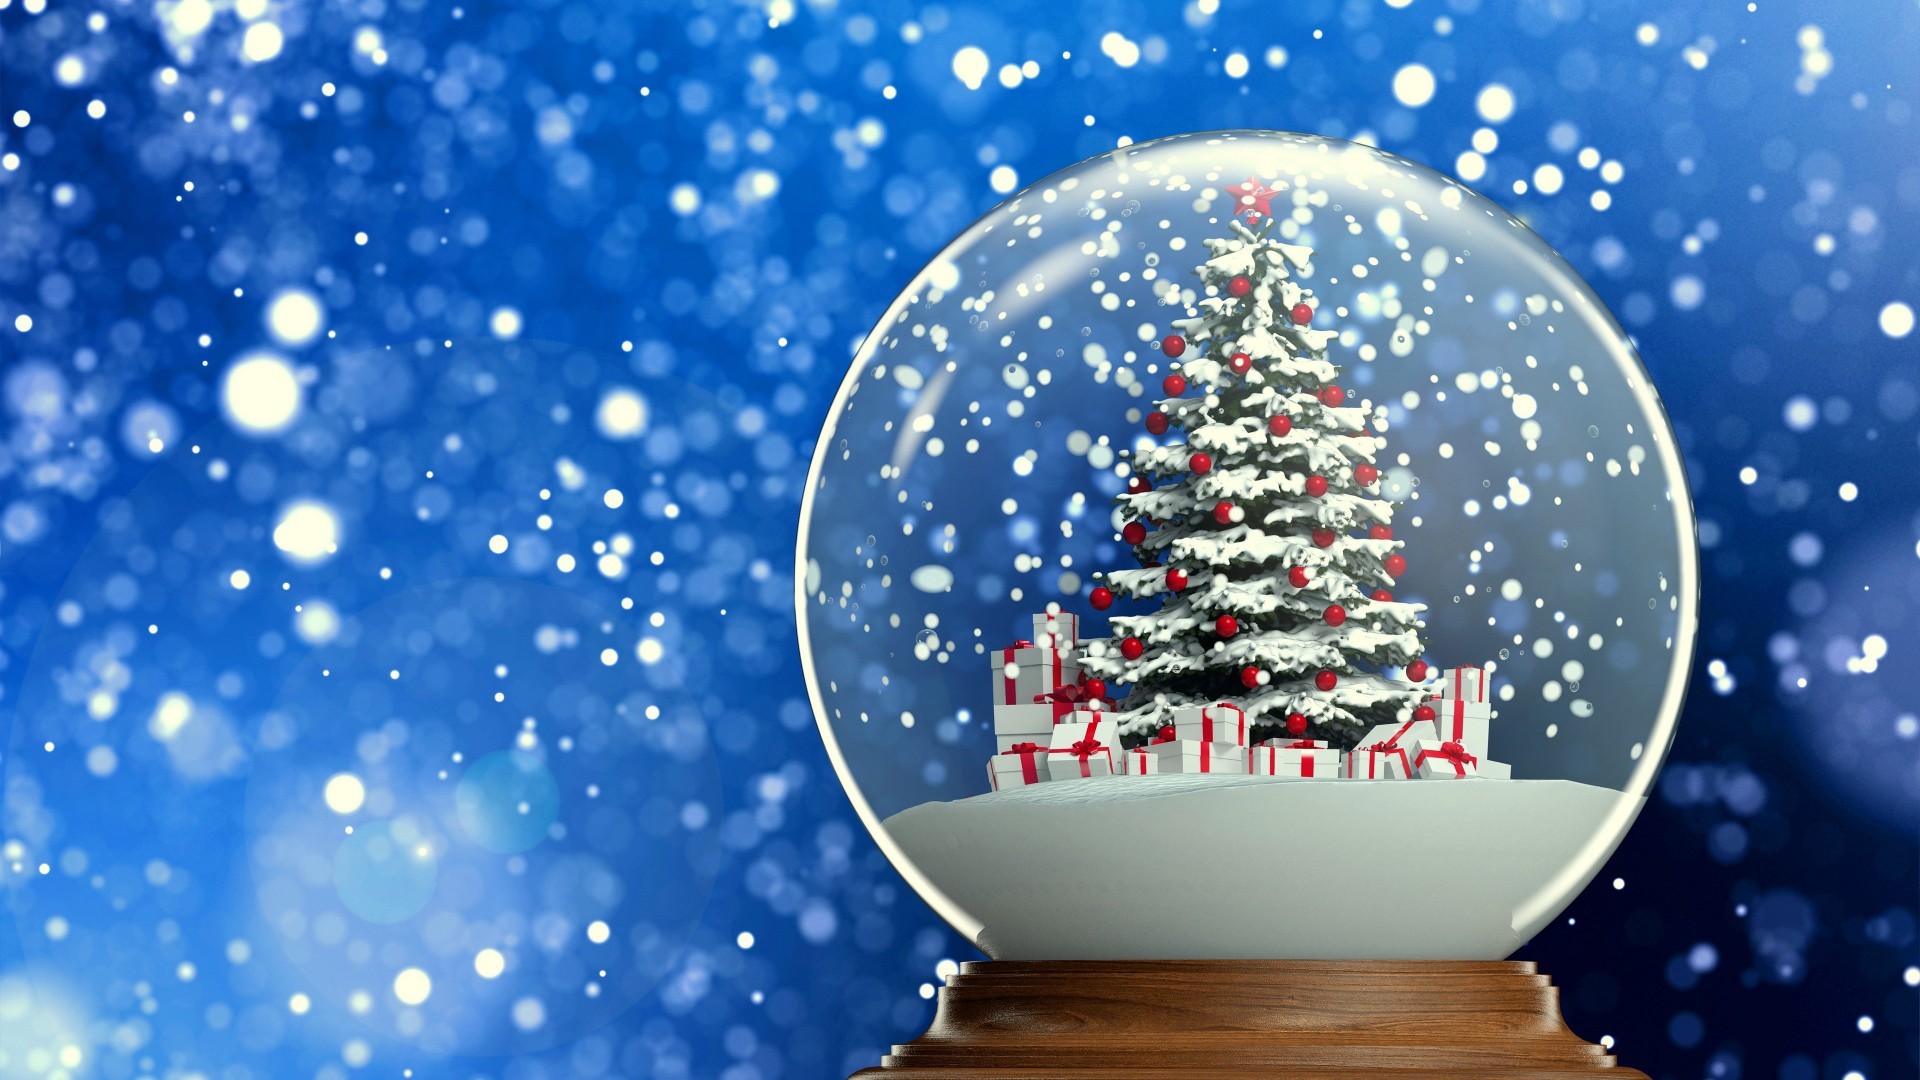 1920x1080 Christmas Snow Globe ID: 531809816 Wallpaper for Free - Creative High  Resolution Pictures